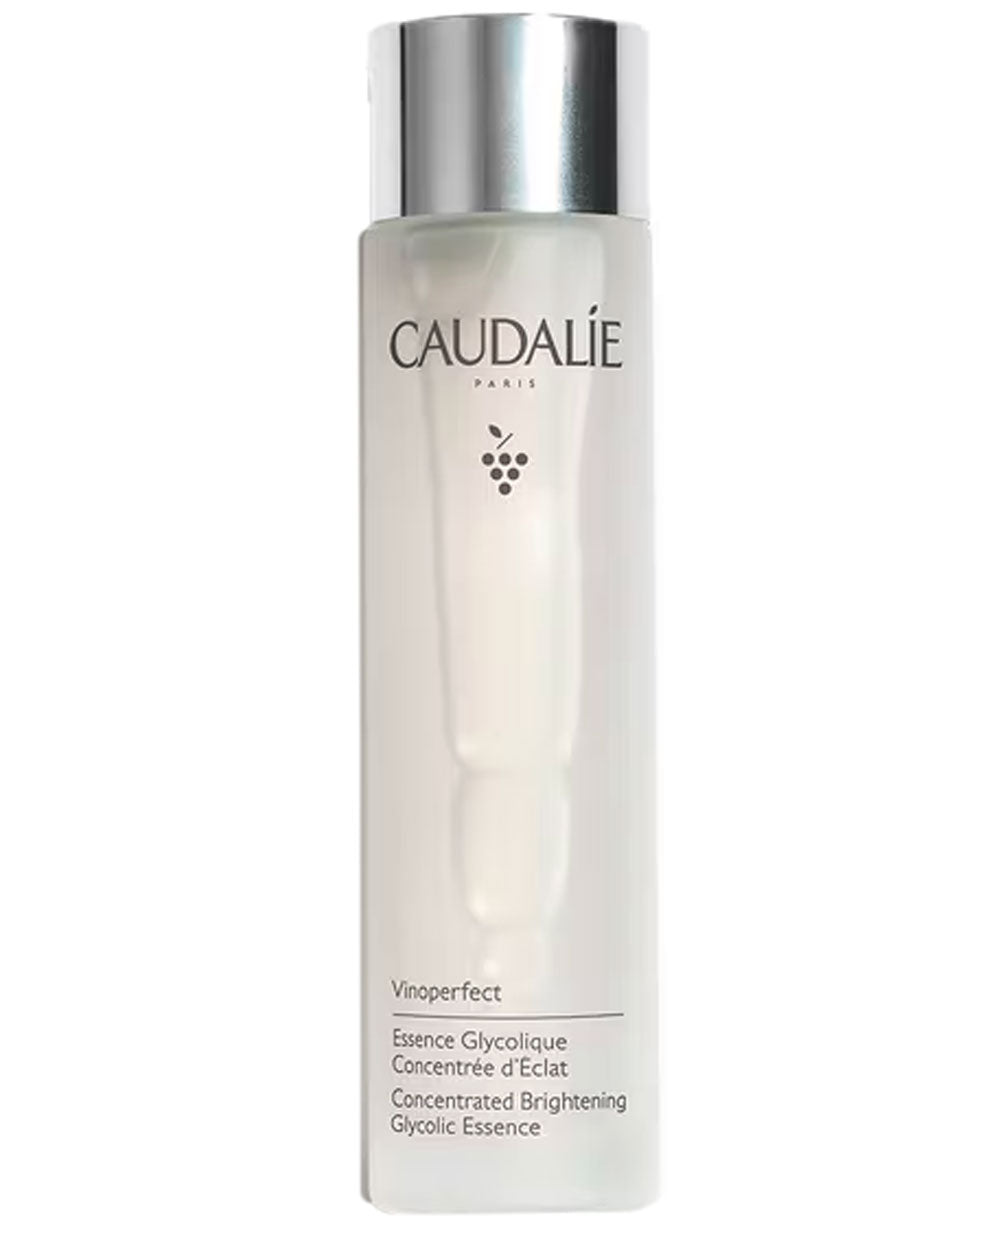 Vinoperfect Concentrating Brightening Glycolic Essence